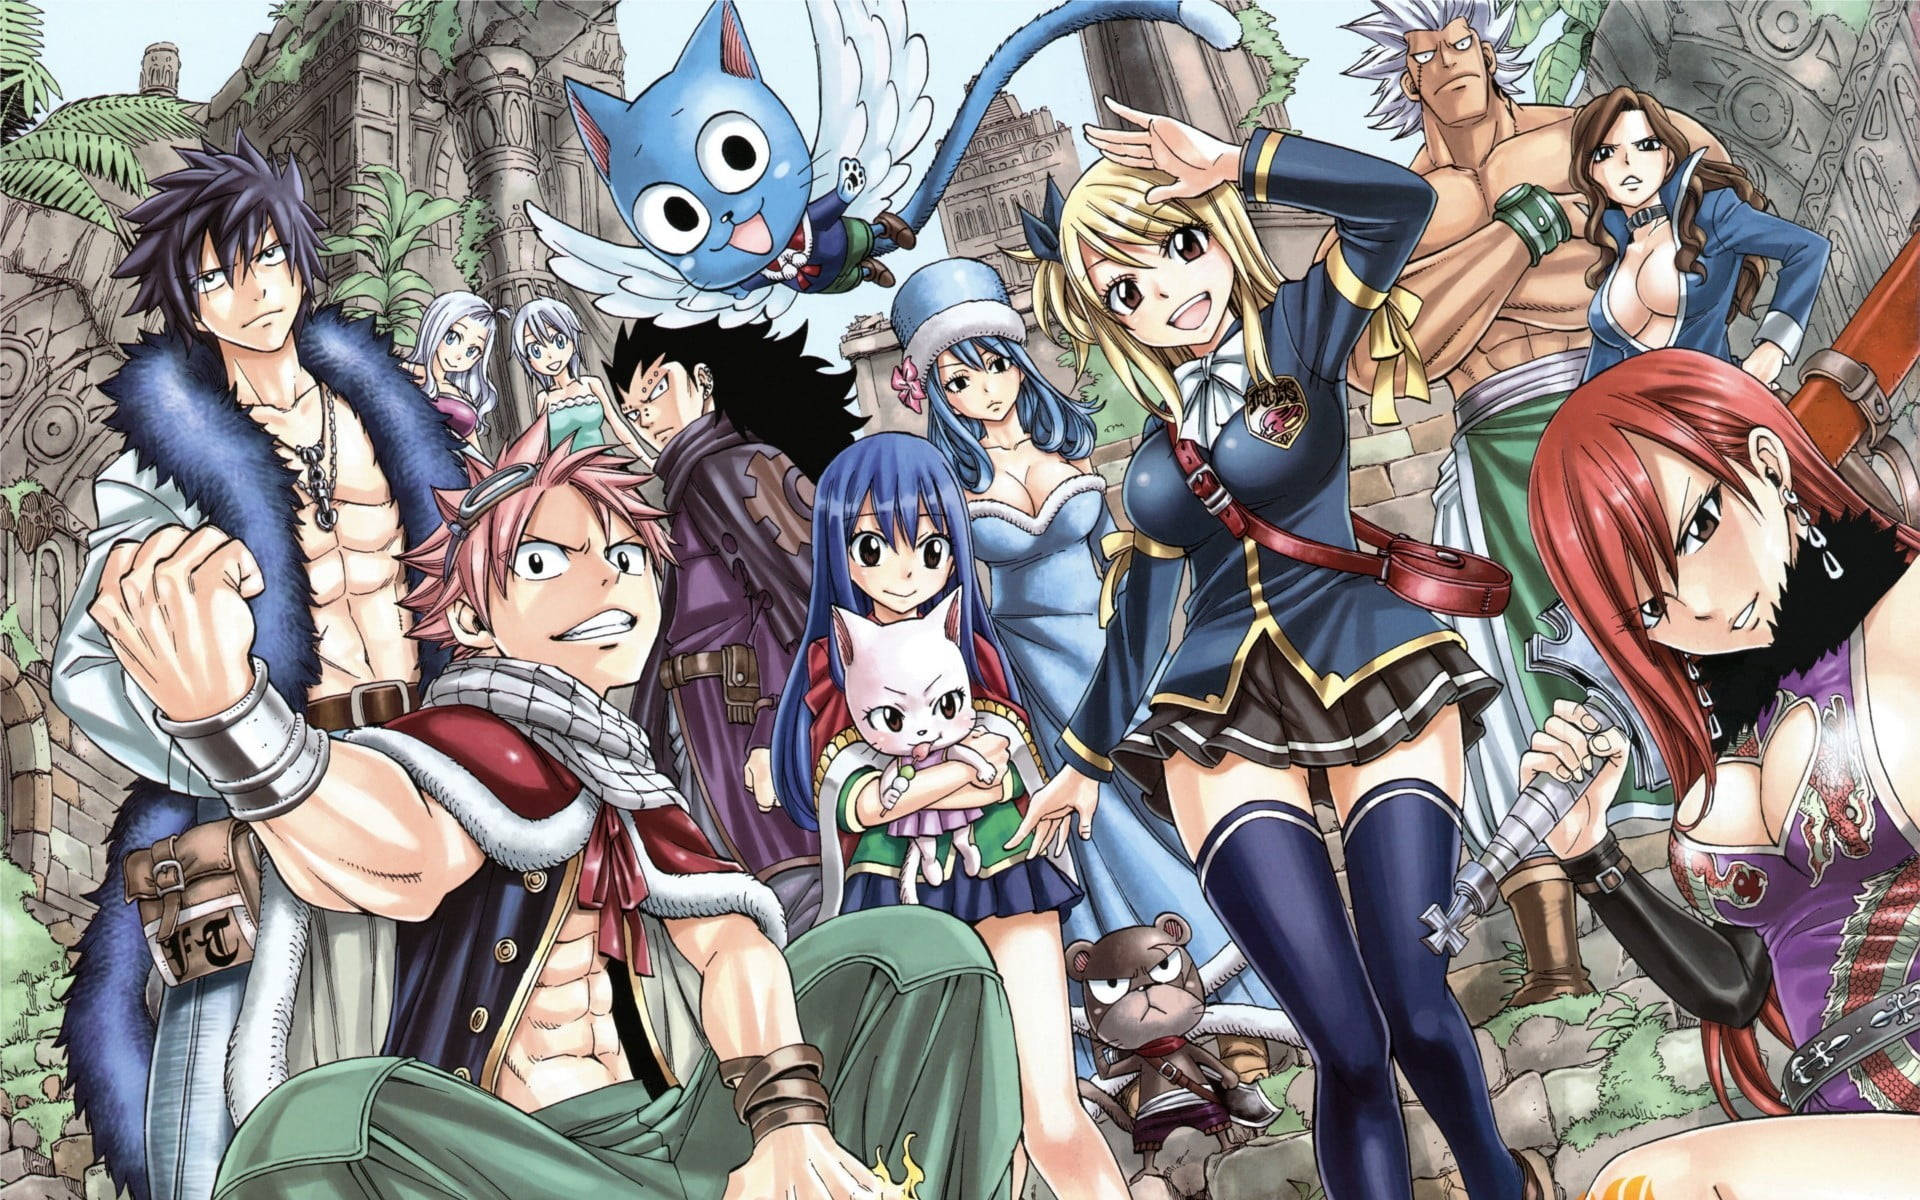 Free Fairy Tail Characters Wallpaper Downloads, [100+] Fairy Tail Characters  Wallpapers for FREE 